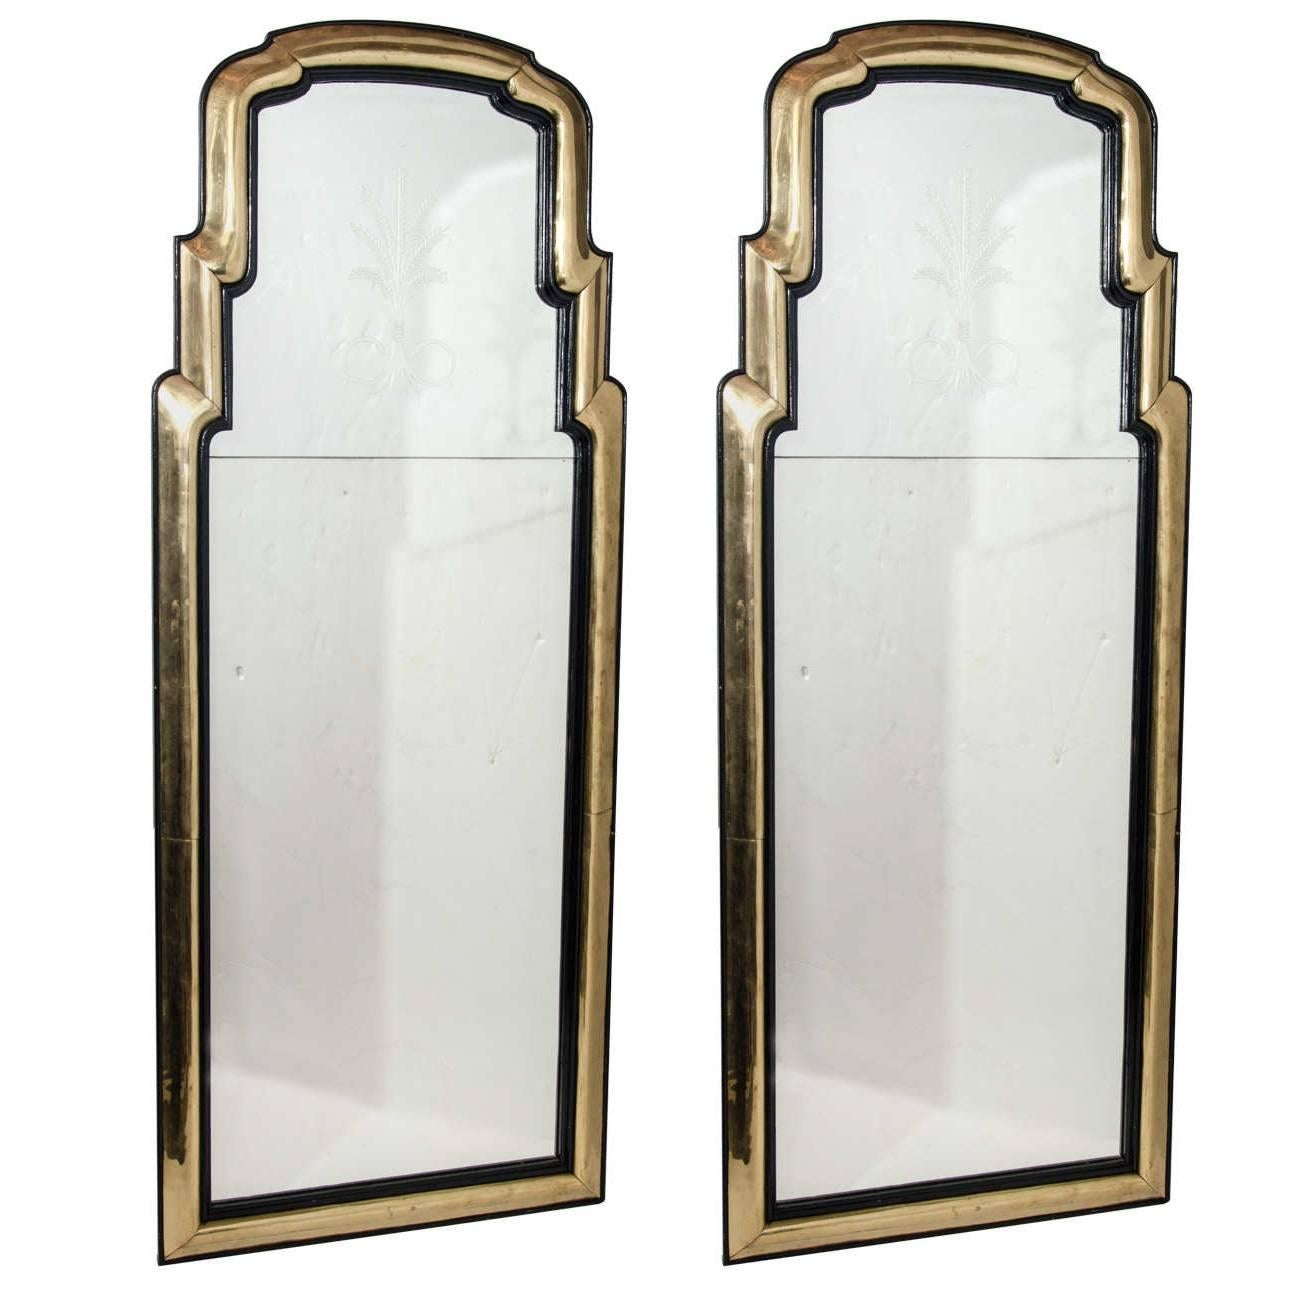 Pair of Antique French Art Deco Gilt Bronze and Ebony Mirrors